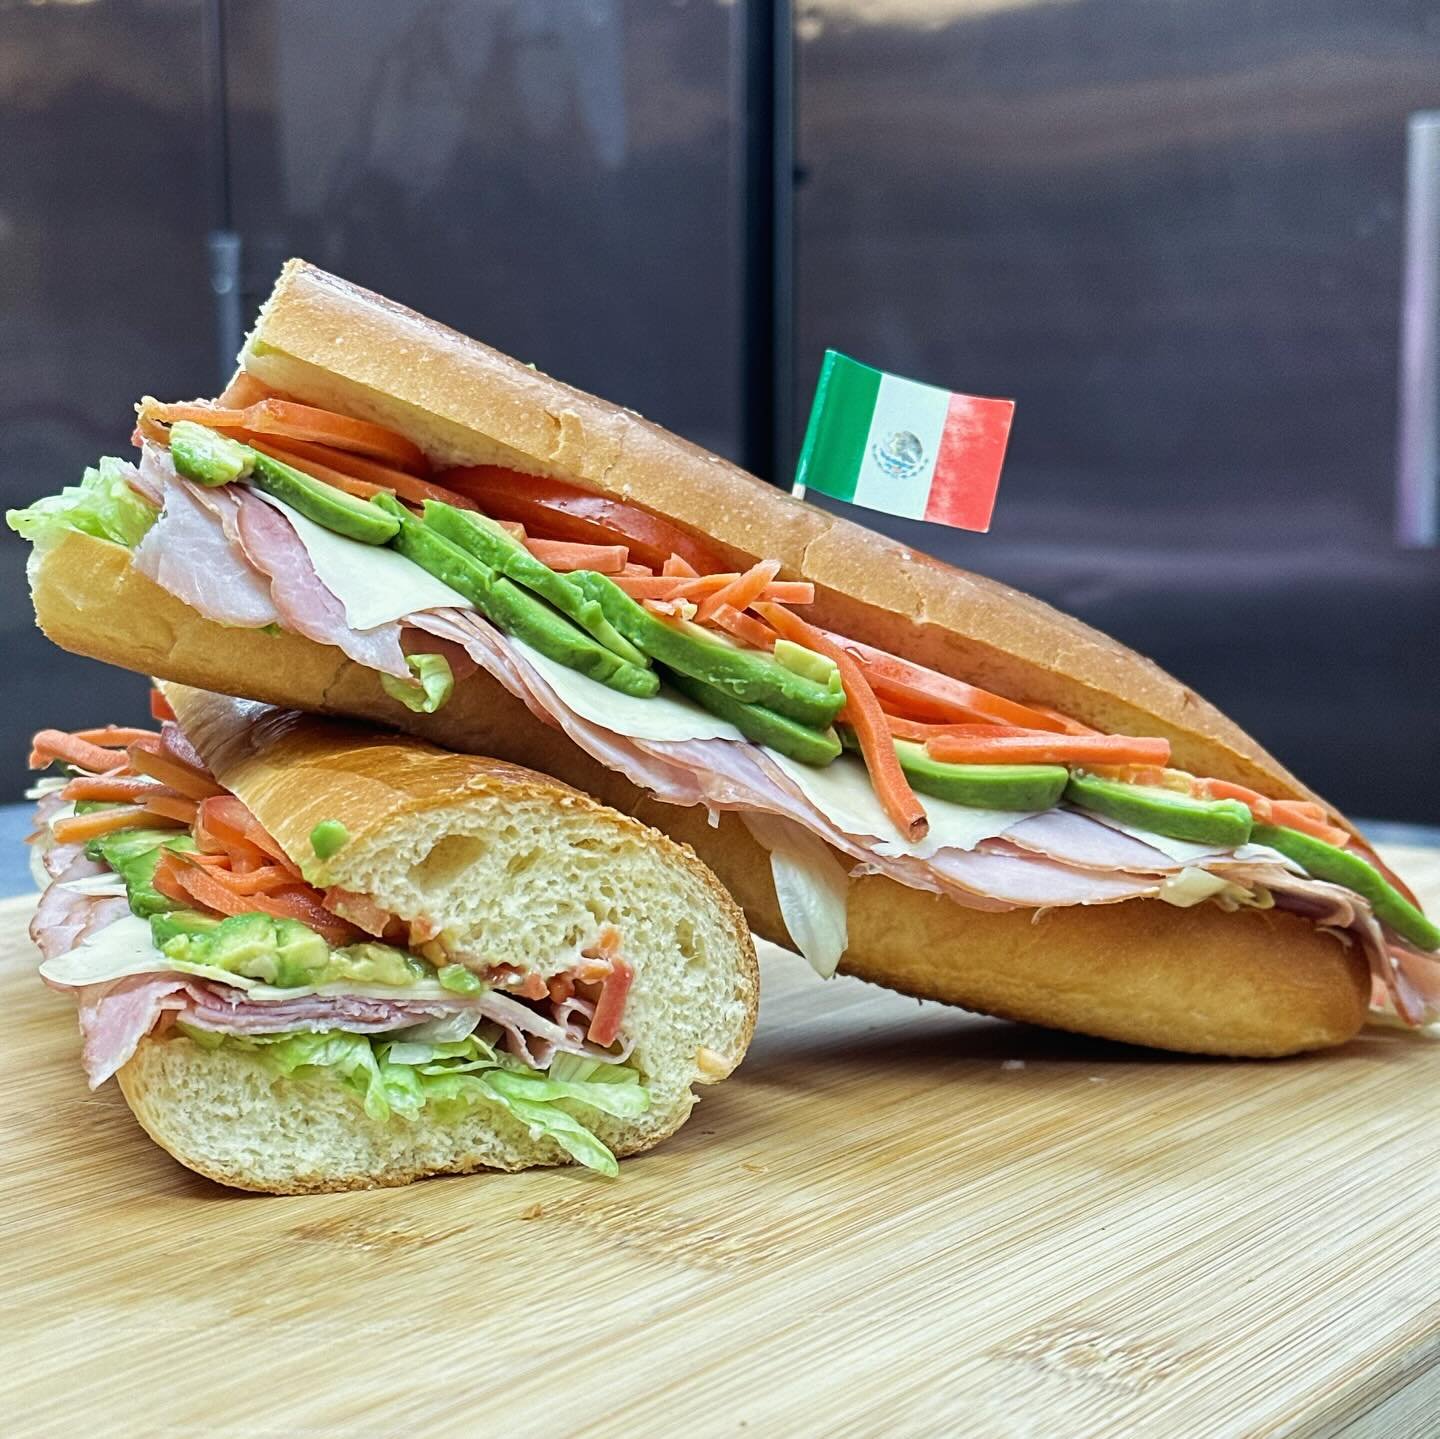 🚨SANDWICH SATURDAY🚨
Available Saturday, May 4th ONLY!
✨ The Palermo Fiesta Sandwich ✨

As a nod to Cinco de Mayo, this week&rsquo;s Saturday Sandwich is inspired by the flavors of Mexico. It is on an artisanal brioche baguette with lime mayo, lettu